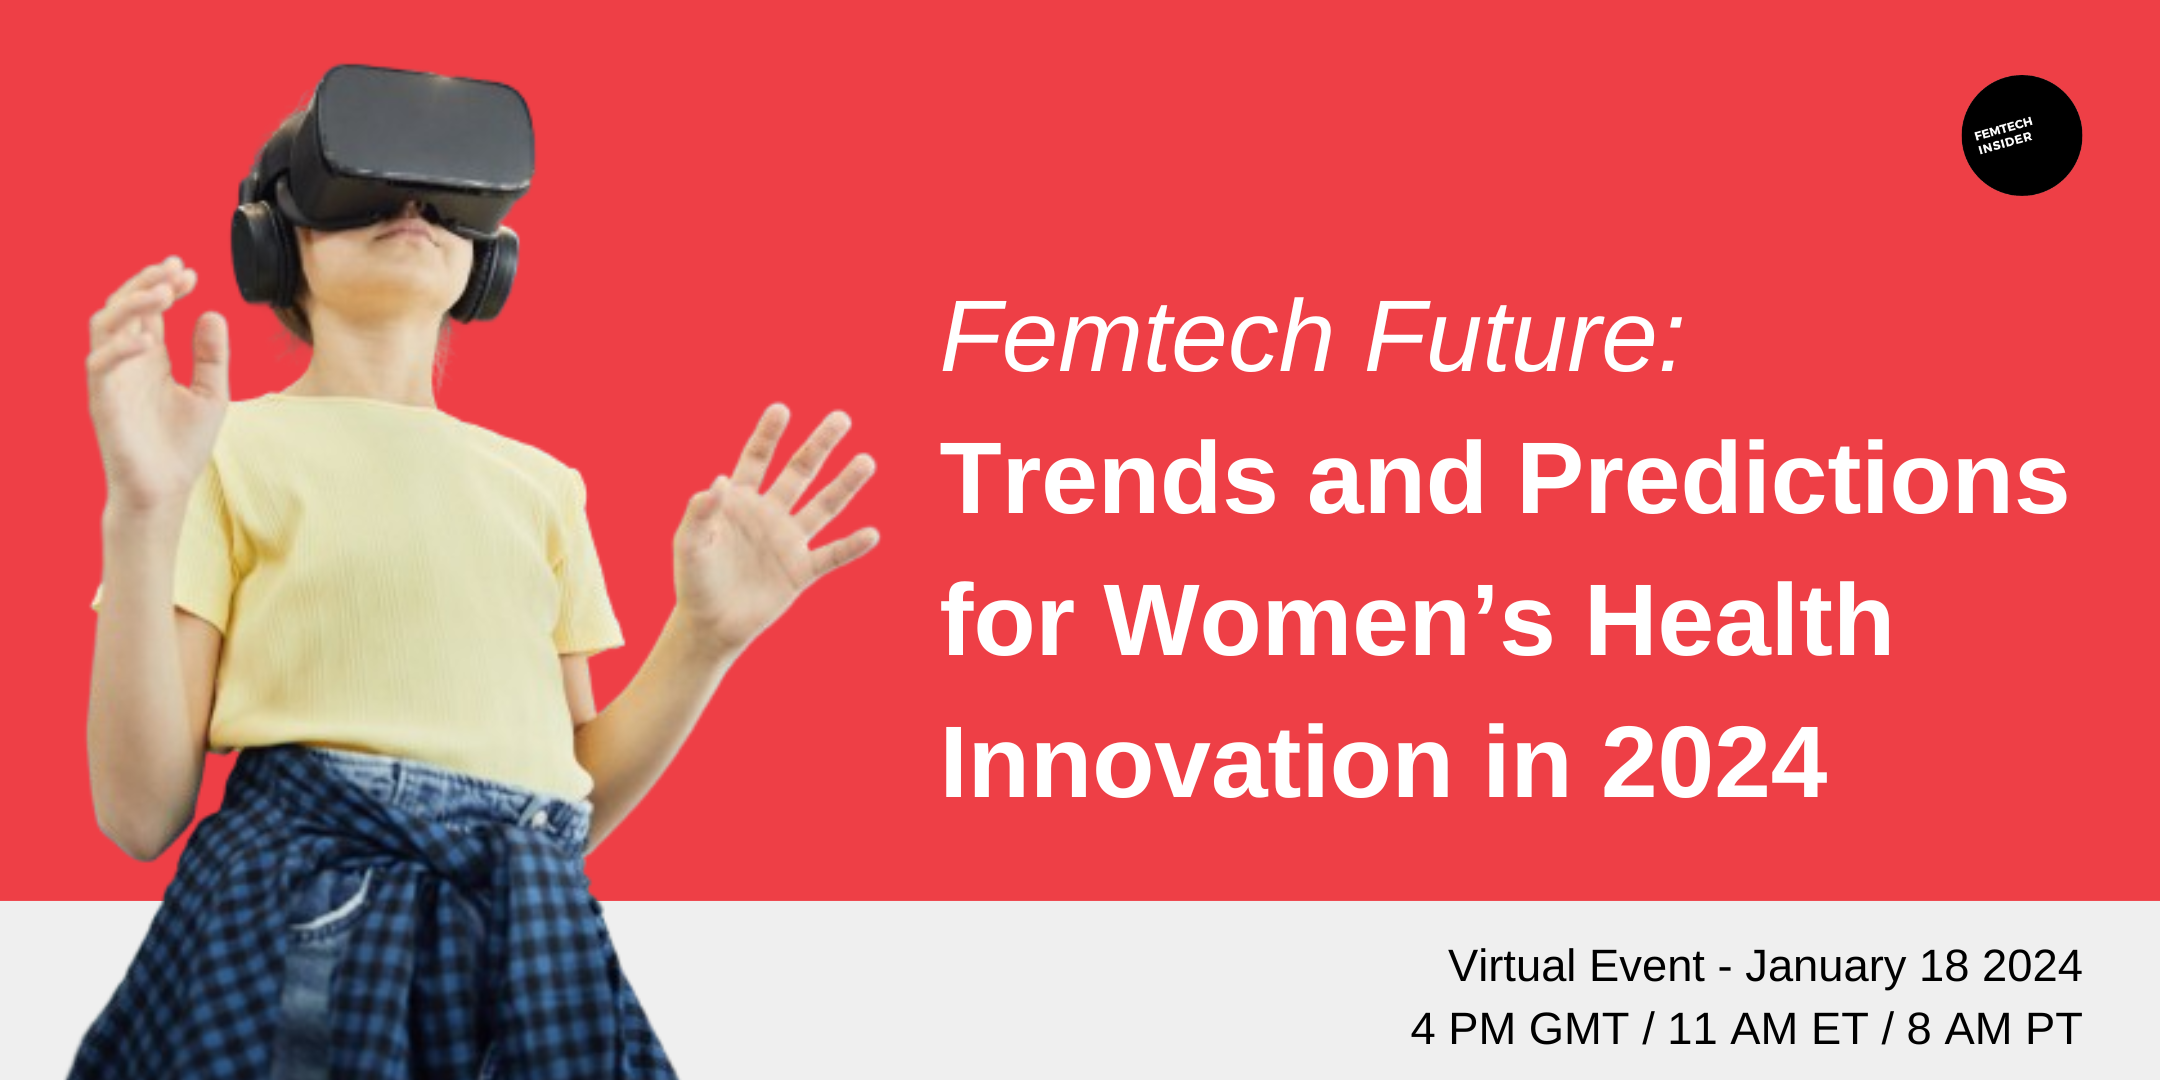 Trends and Predictions for Women’s Health Innovation in 2024